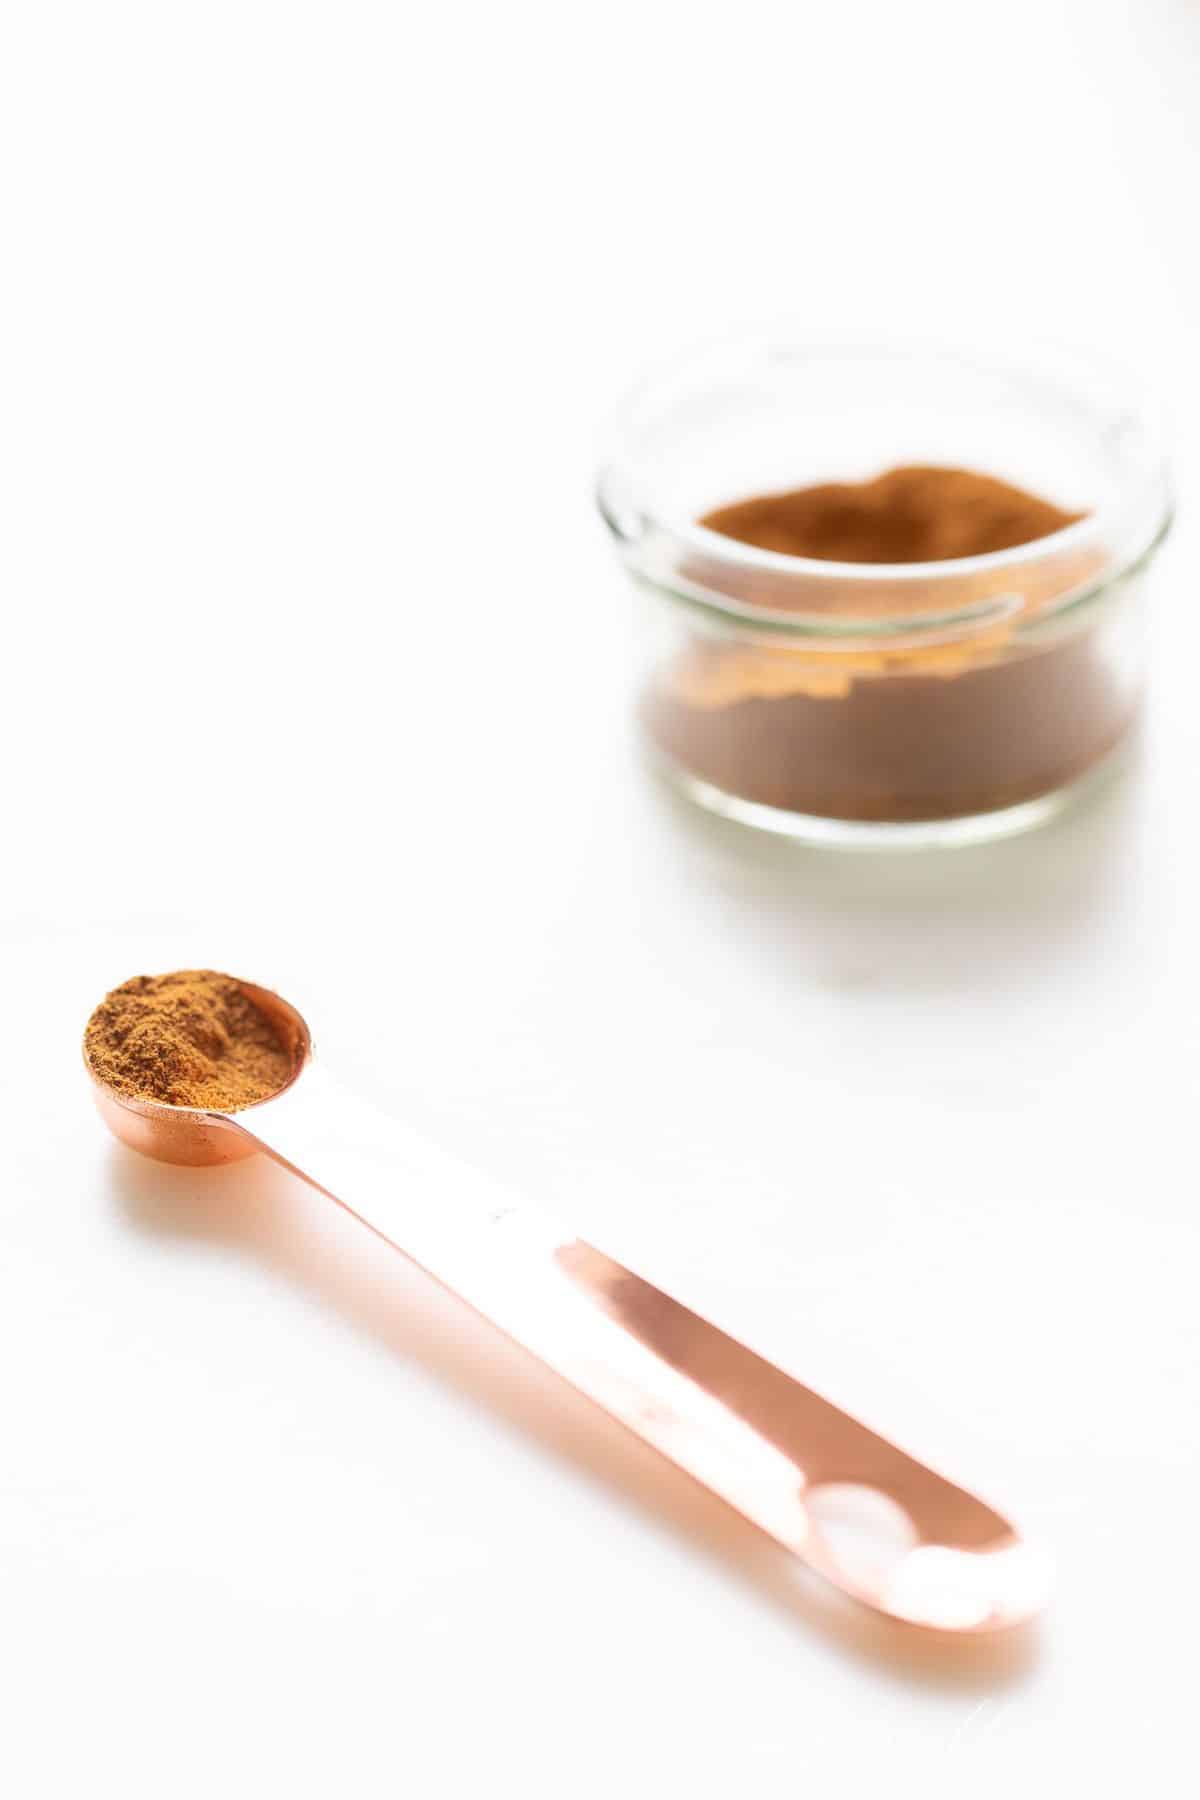 Pumpkin pie spice in a measuring spoon and in a glass jar to the side. 